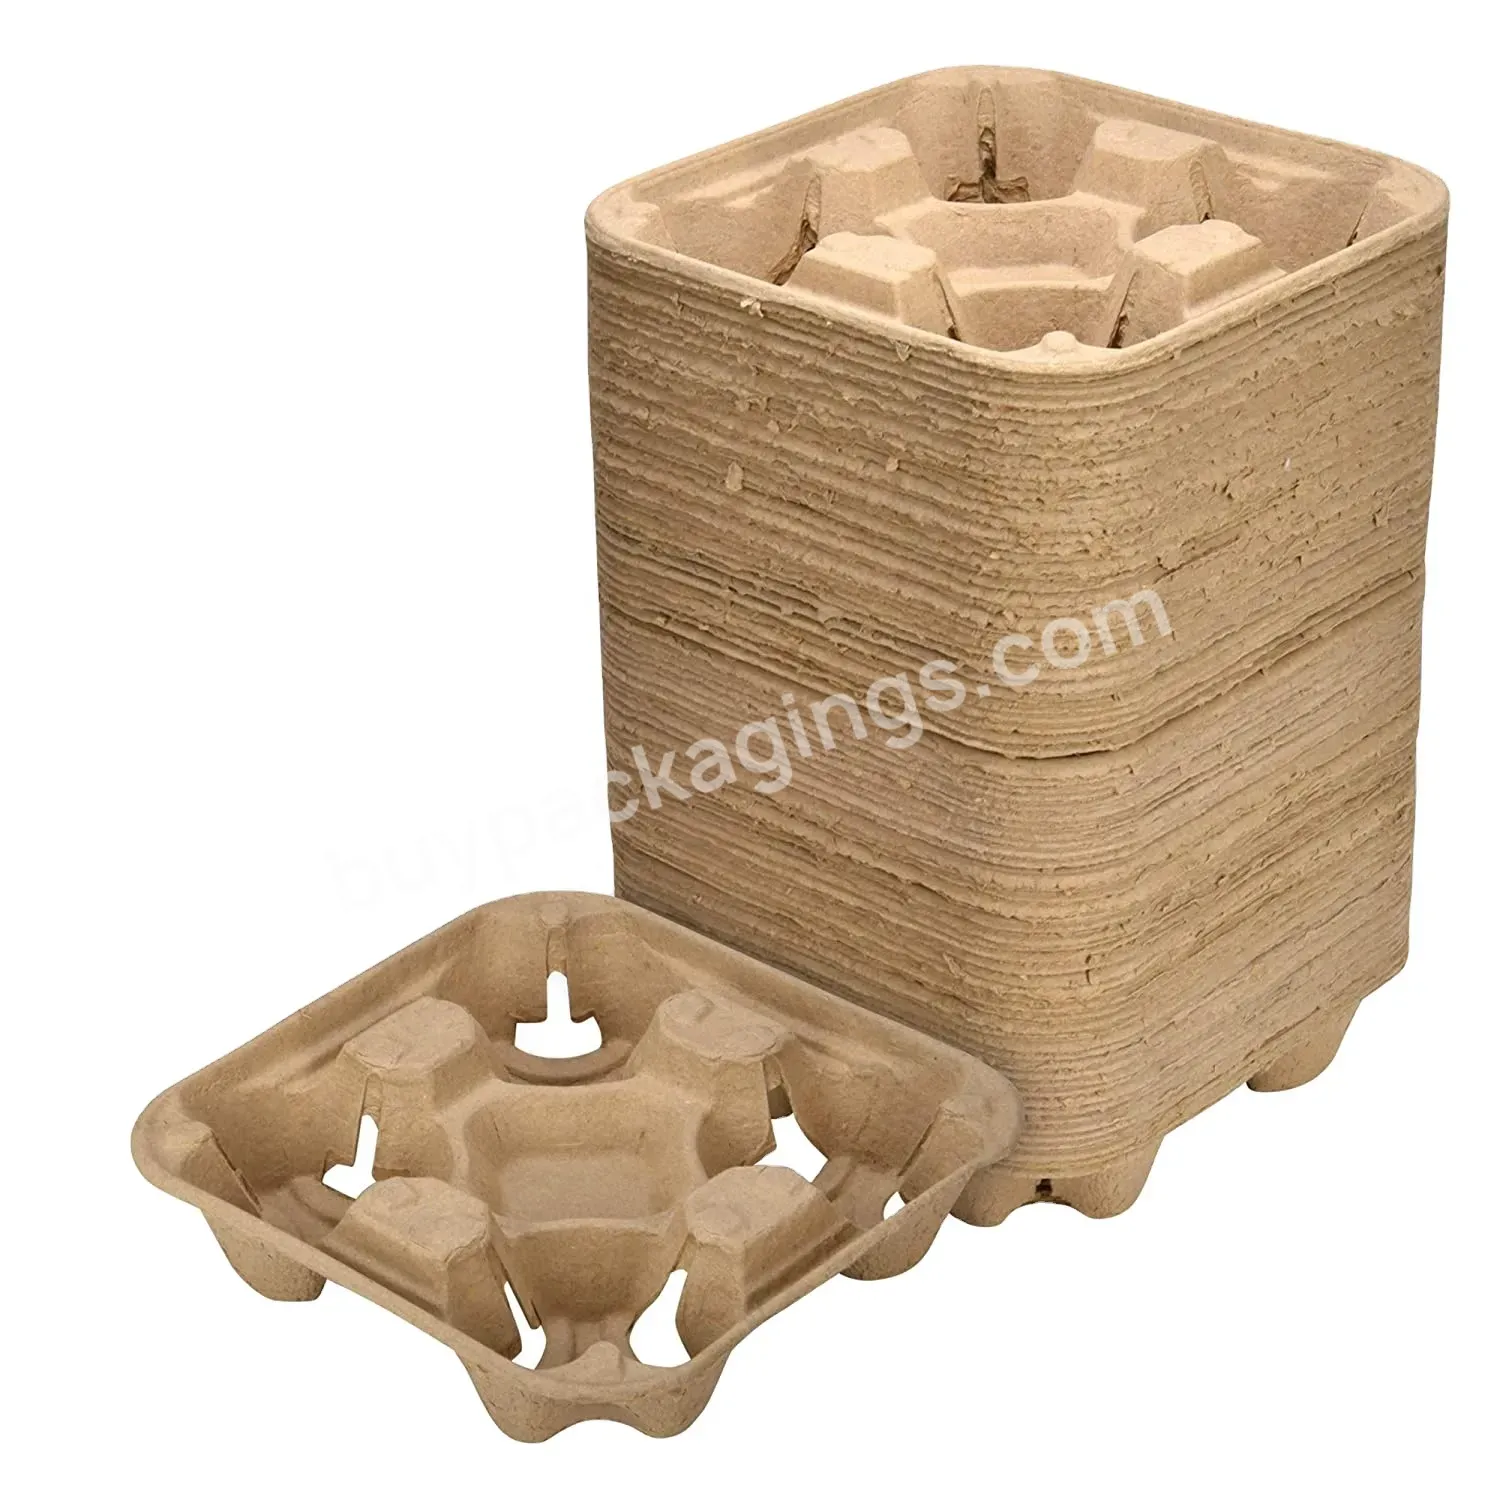 Biodegradable Container Compostable Stackable Ecofriendly Coffee Drink Takeaway Cup Carrier Holder - Buy Coffee Cup Holder,Coffee Holder Tray,2&4 Cup Holder.